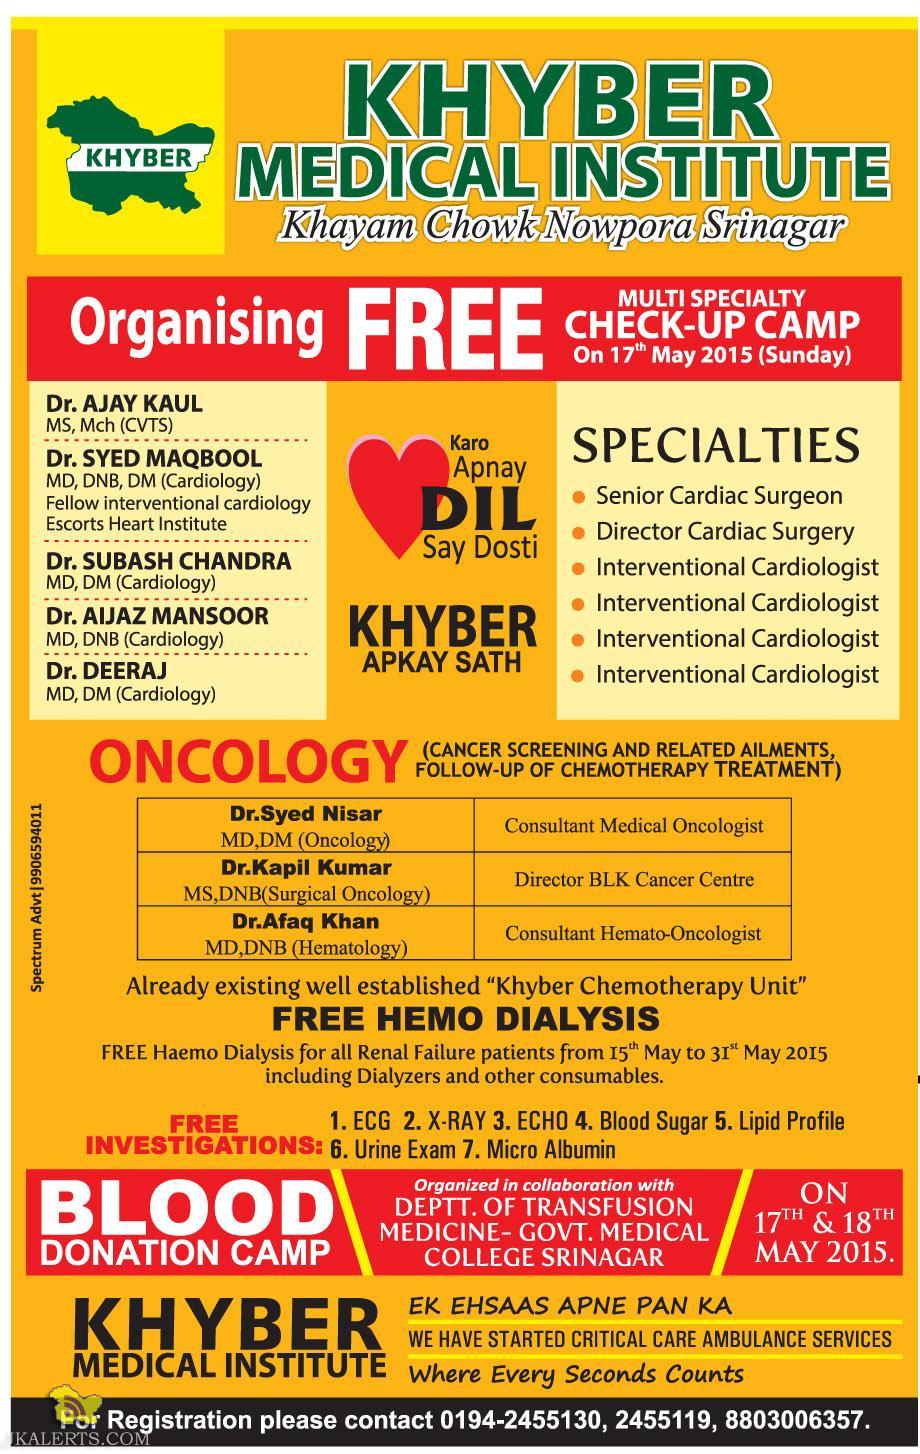 KHYBER MEDICAL INSTITUTE FREE CHECKUP CAMP